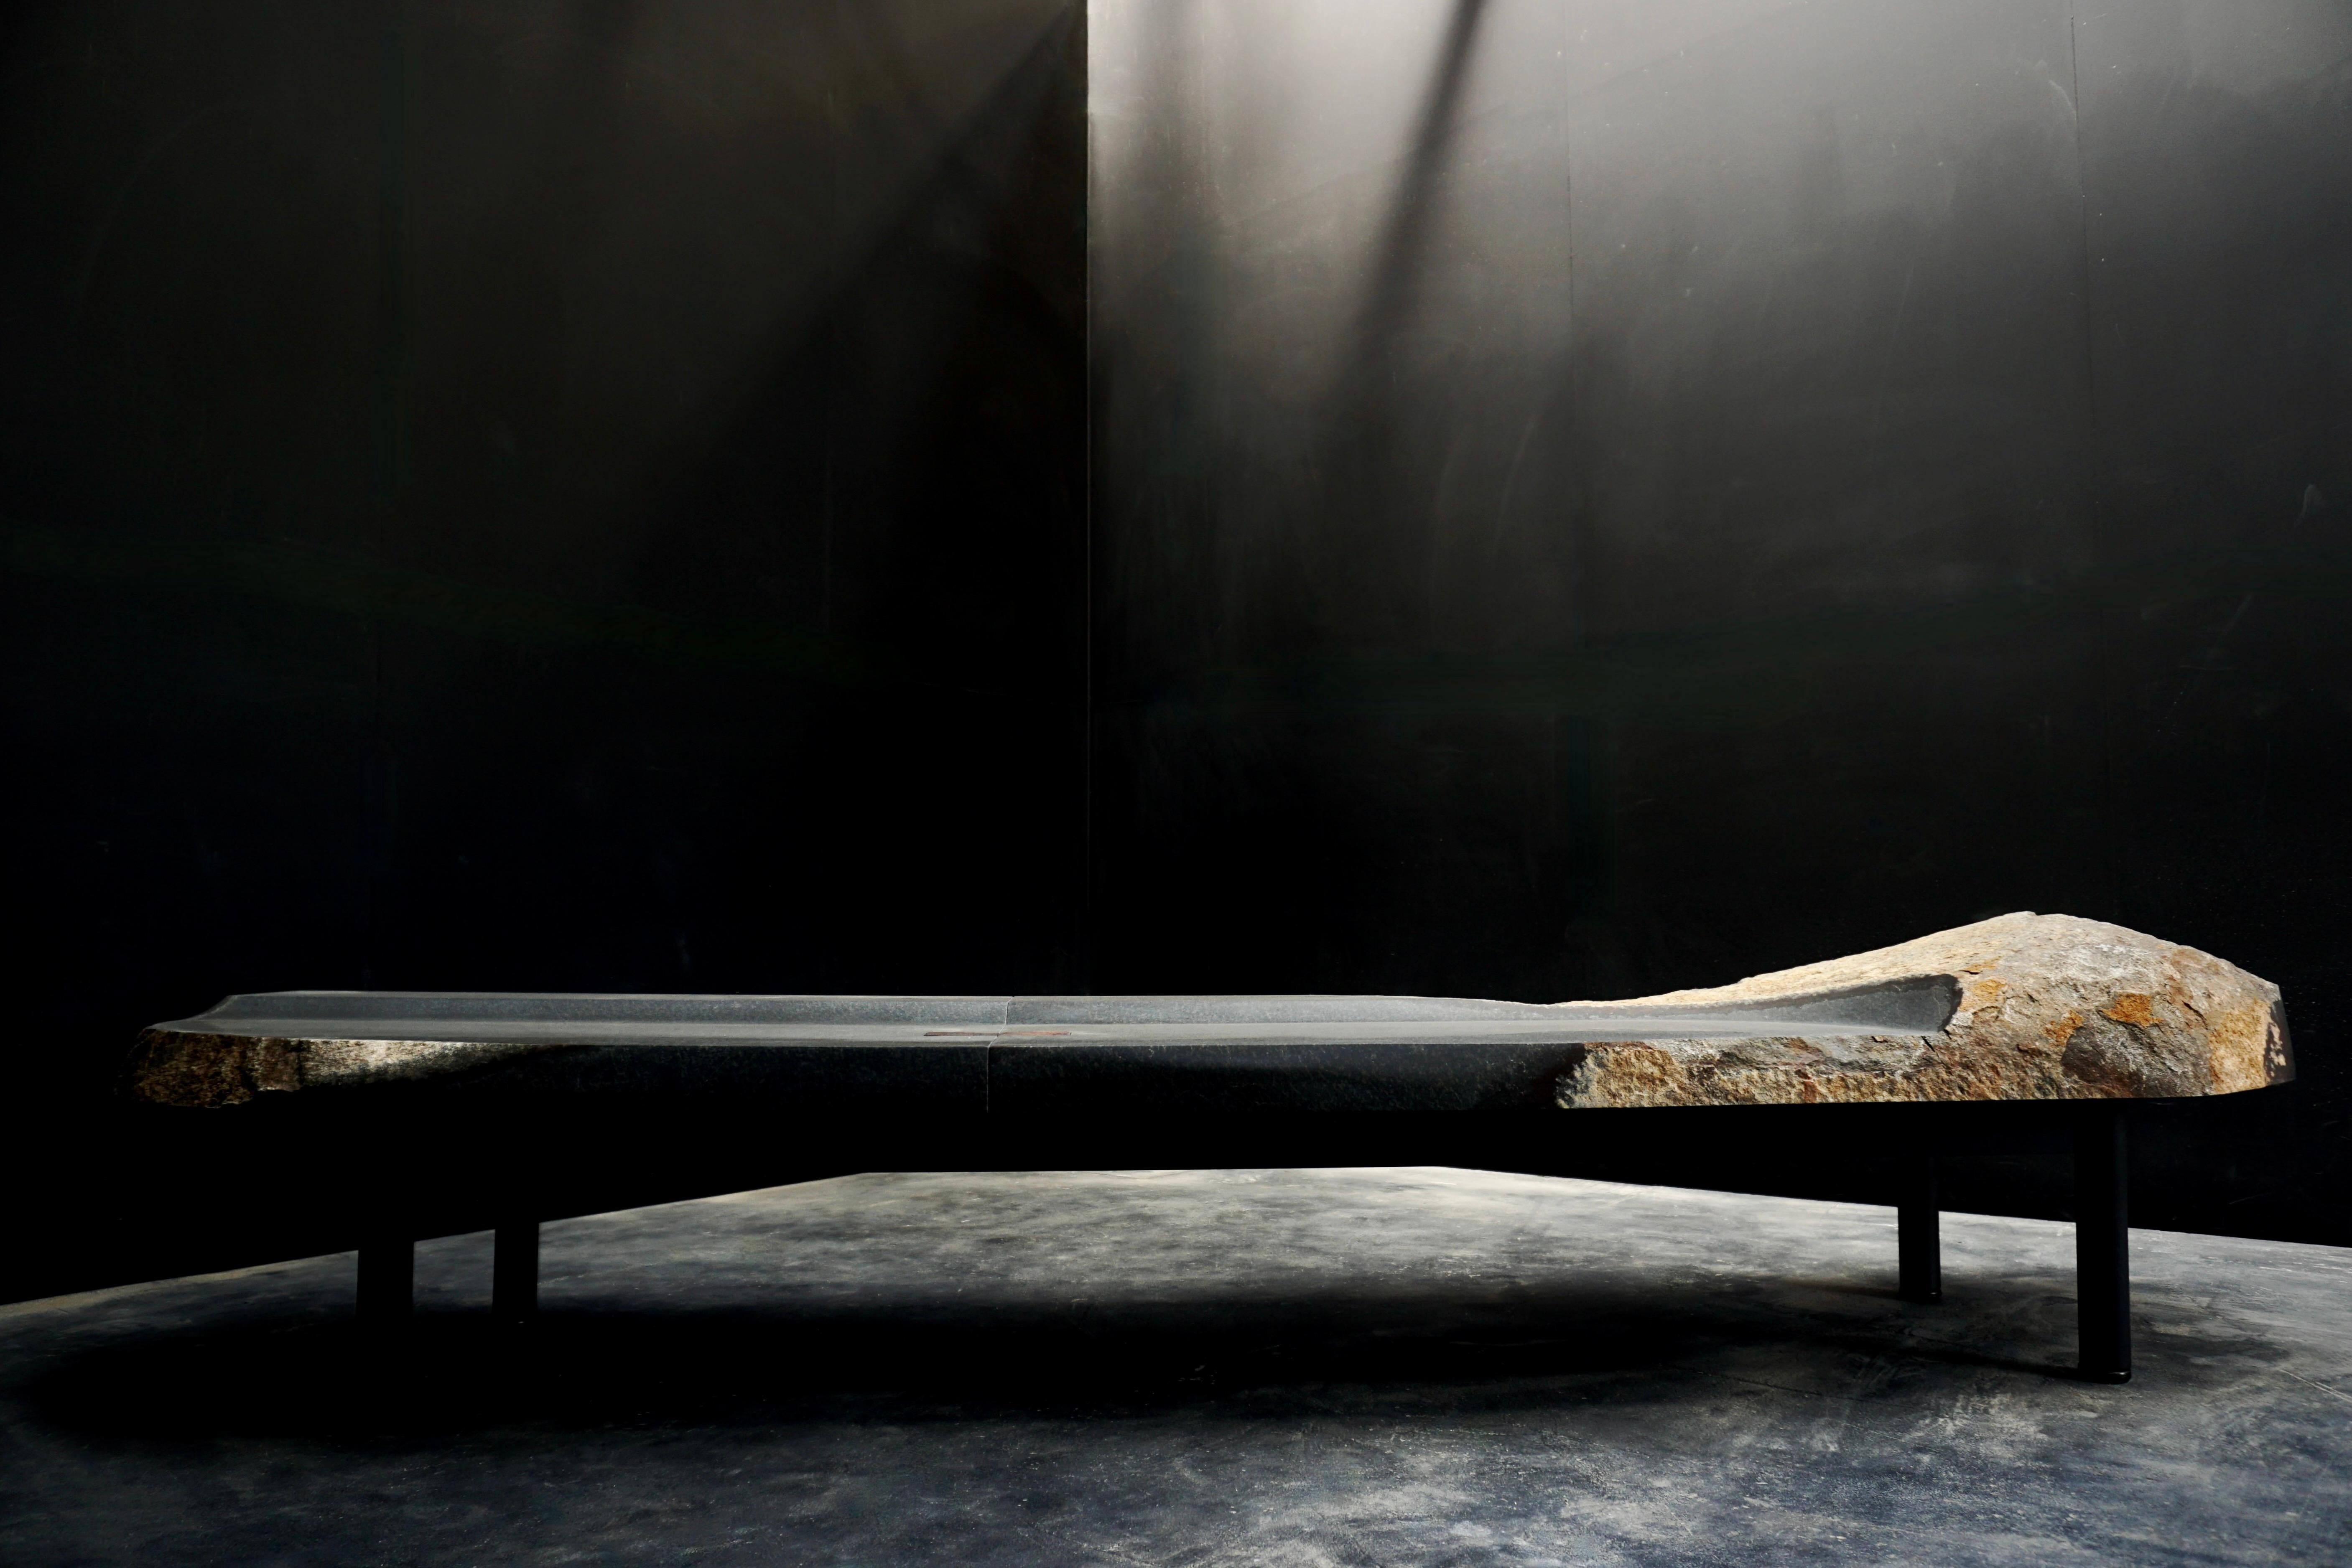 Chigiri Bench by Okurayama
One Of A Kind.
Dimensions: D 60 x W 240 x H 40 cm.
Materials: Iron and stone.
Weight: 390 kg. 


The Daté Kan Stone is a rare stone that exist only in a few mountains in Japan.

The defining characteristic of Date´ Kan